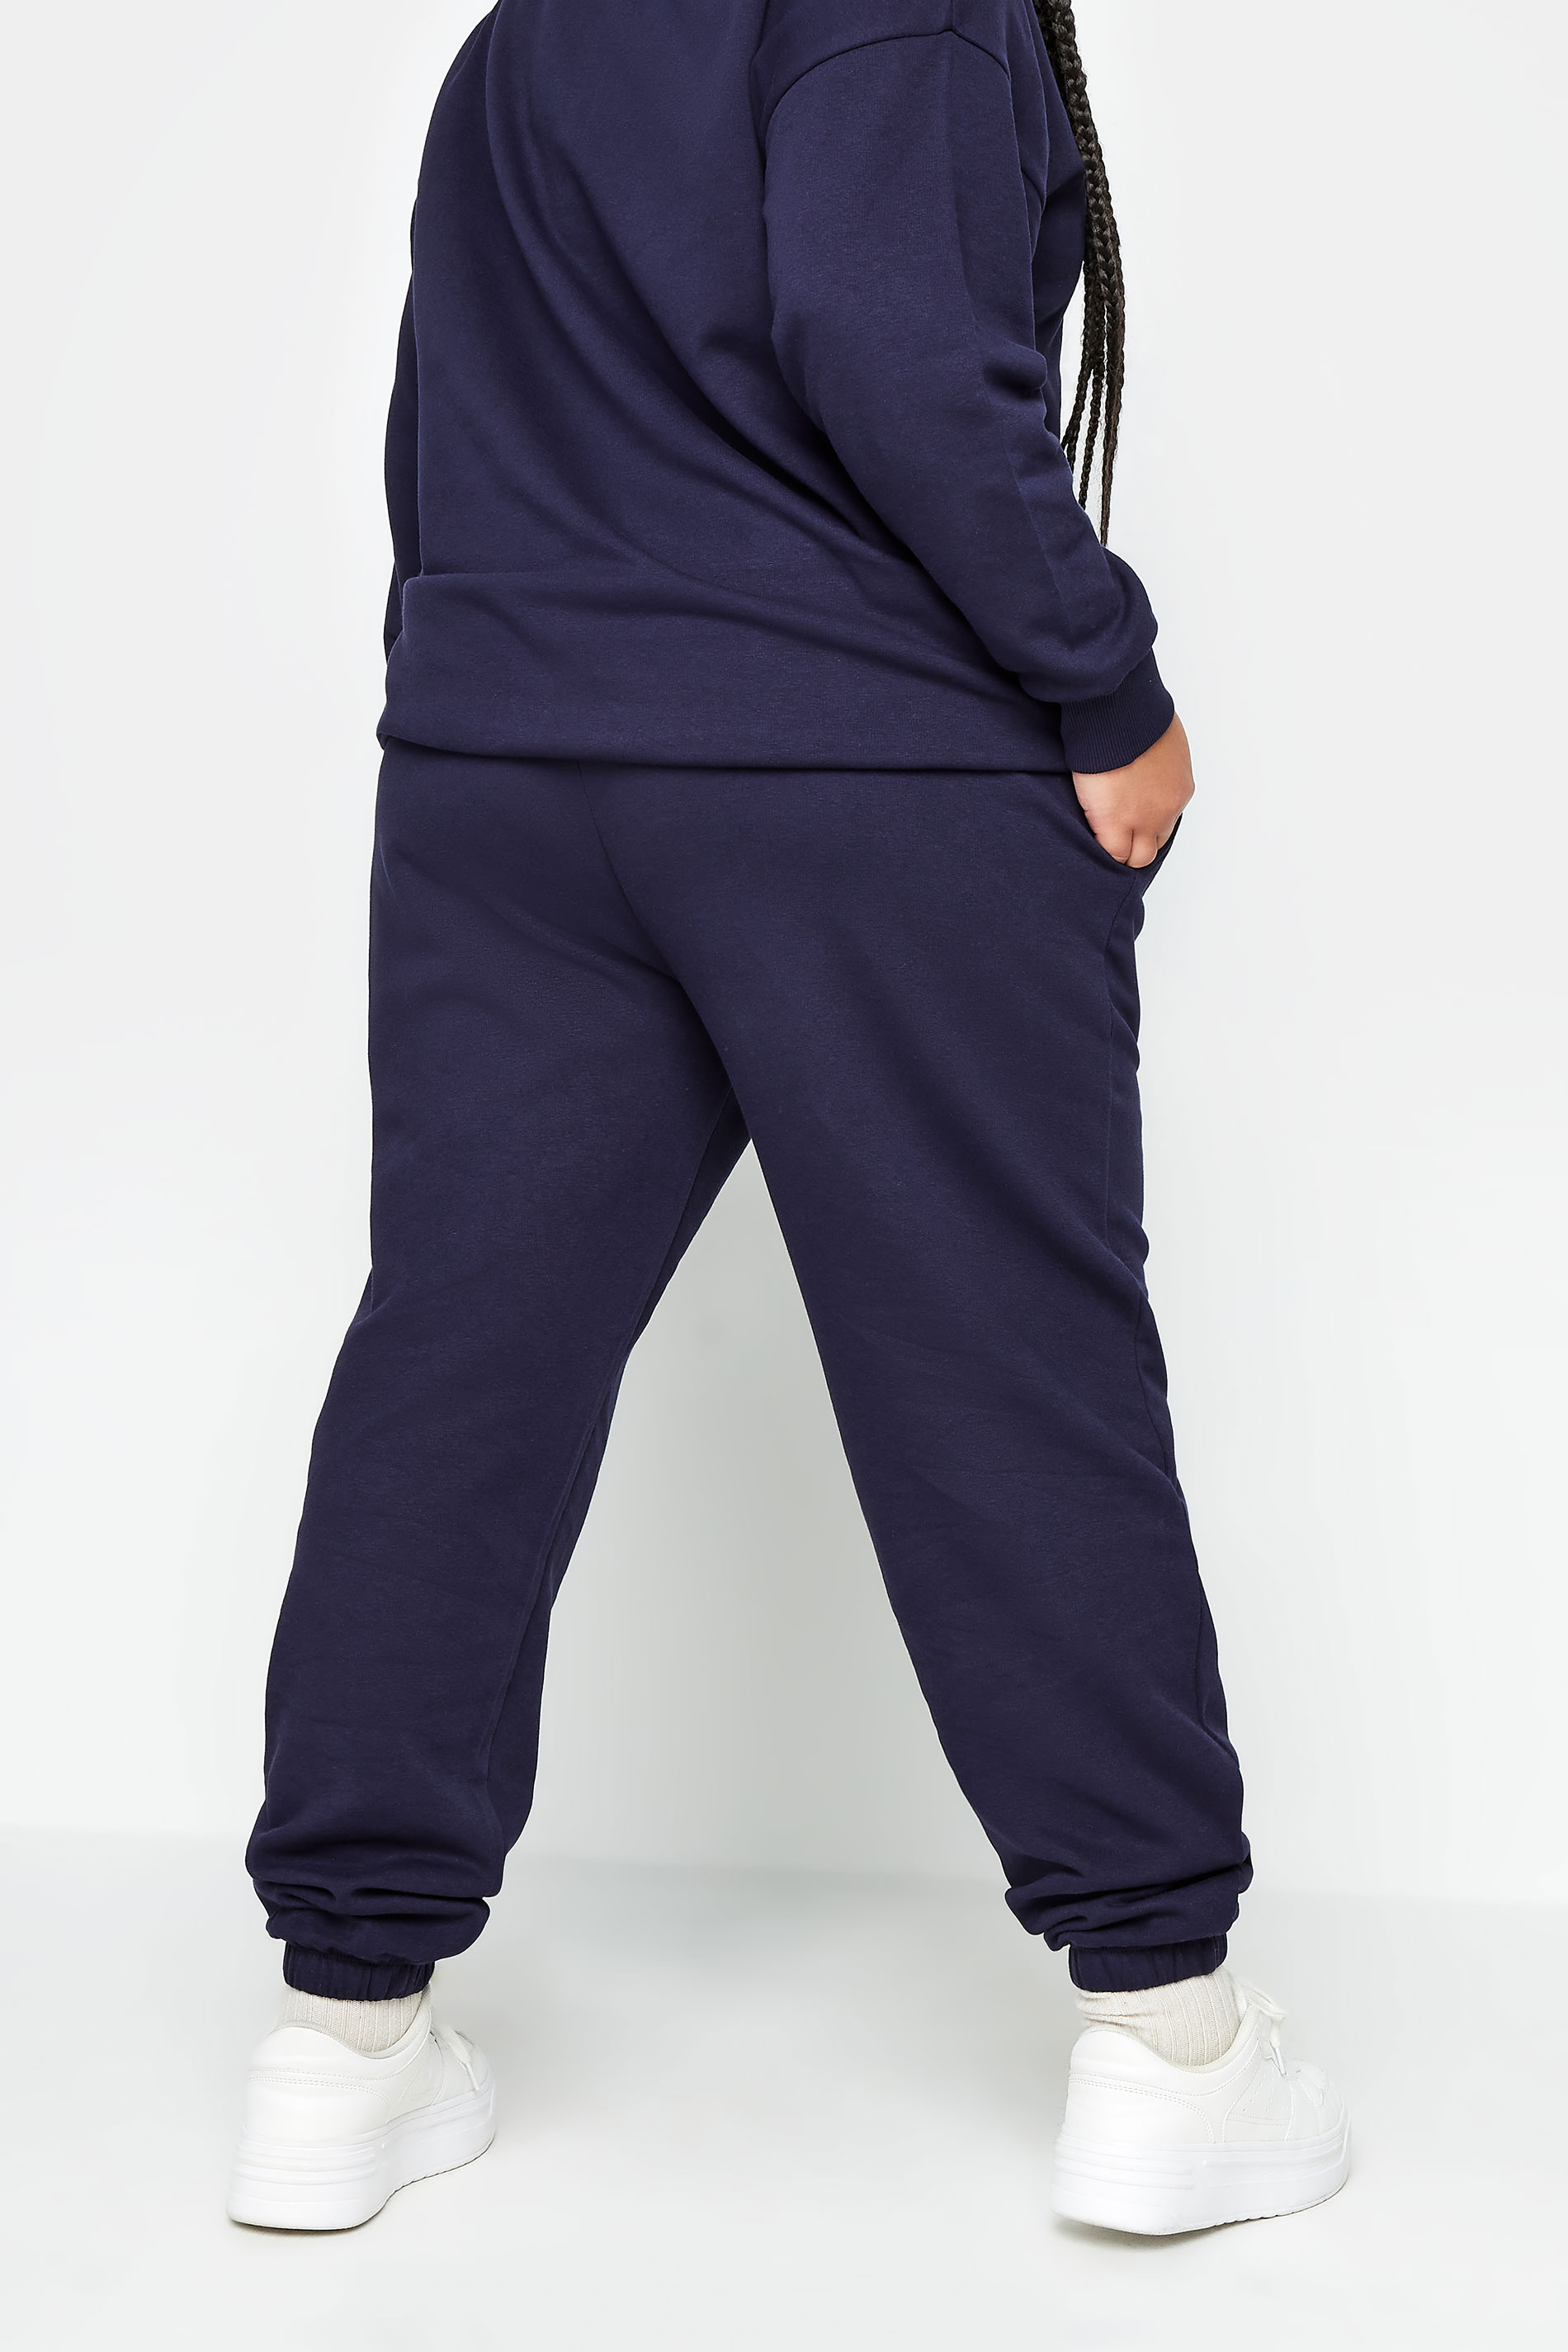 YOURS Plus Size Navy Blue Cuffed Joggers | Yours Clothing 3